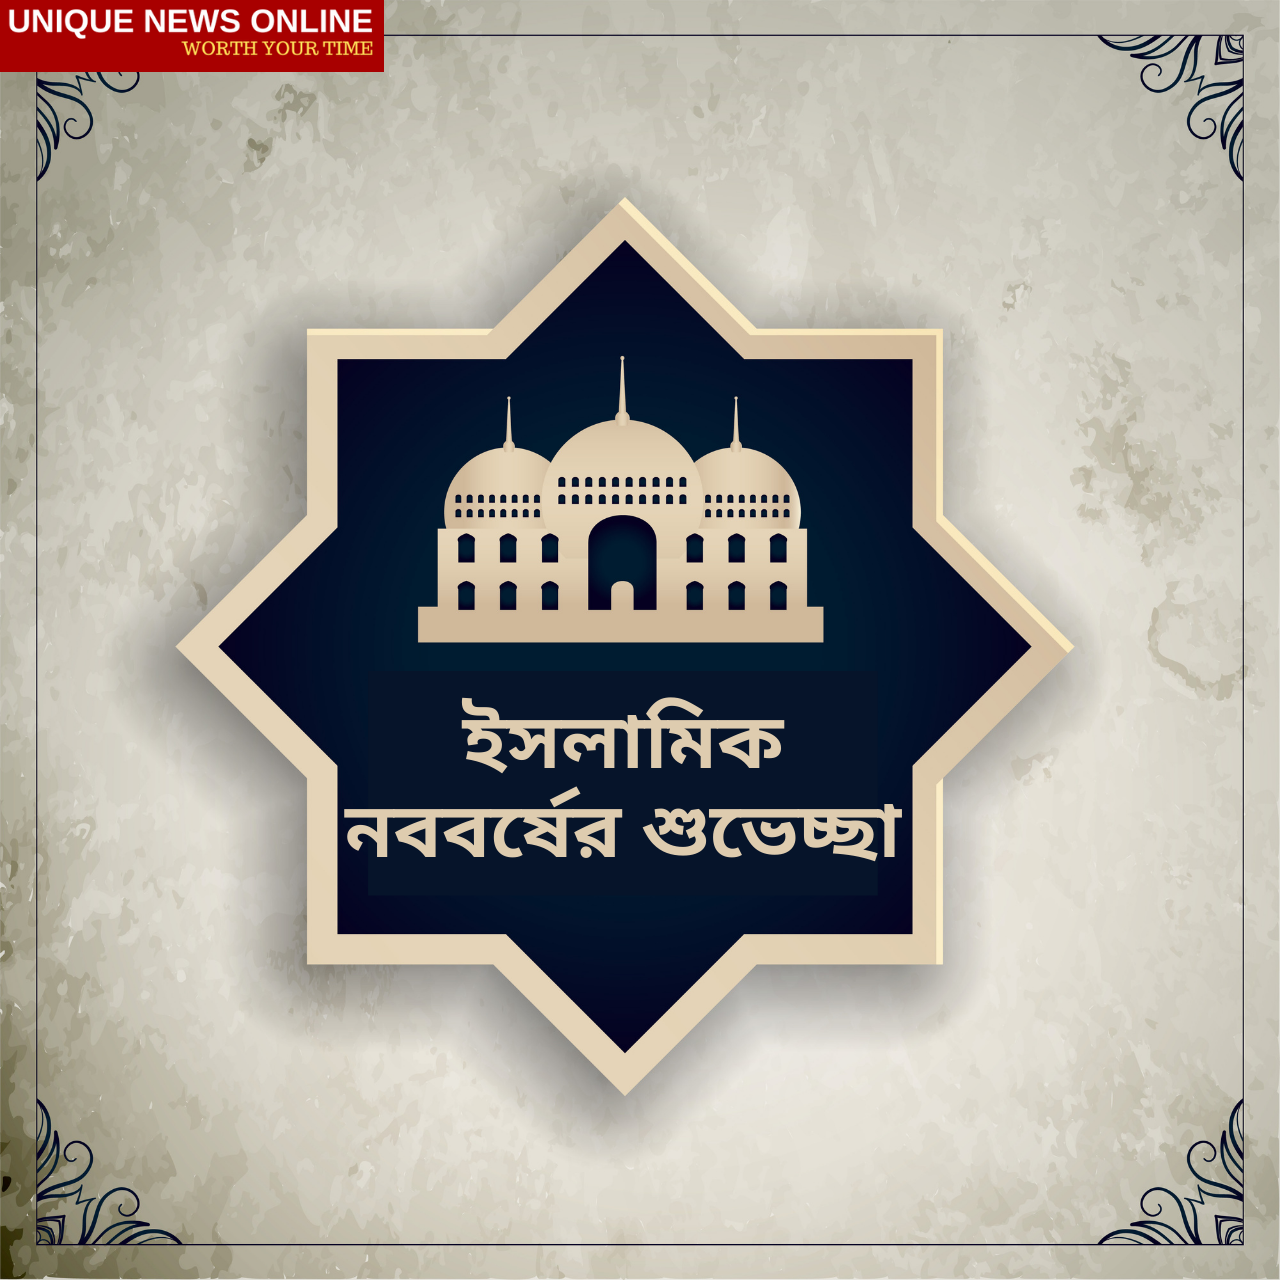 Islamic New Year 2021 Bengali Wishes, Images, Quotes, Greetings, Messages, and Status to Share